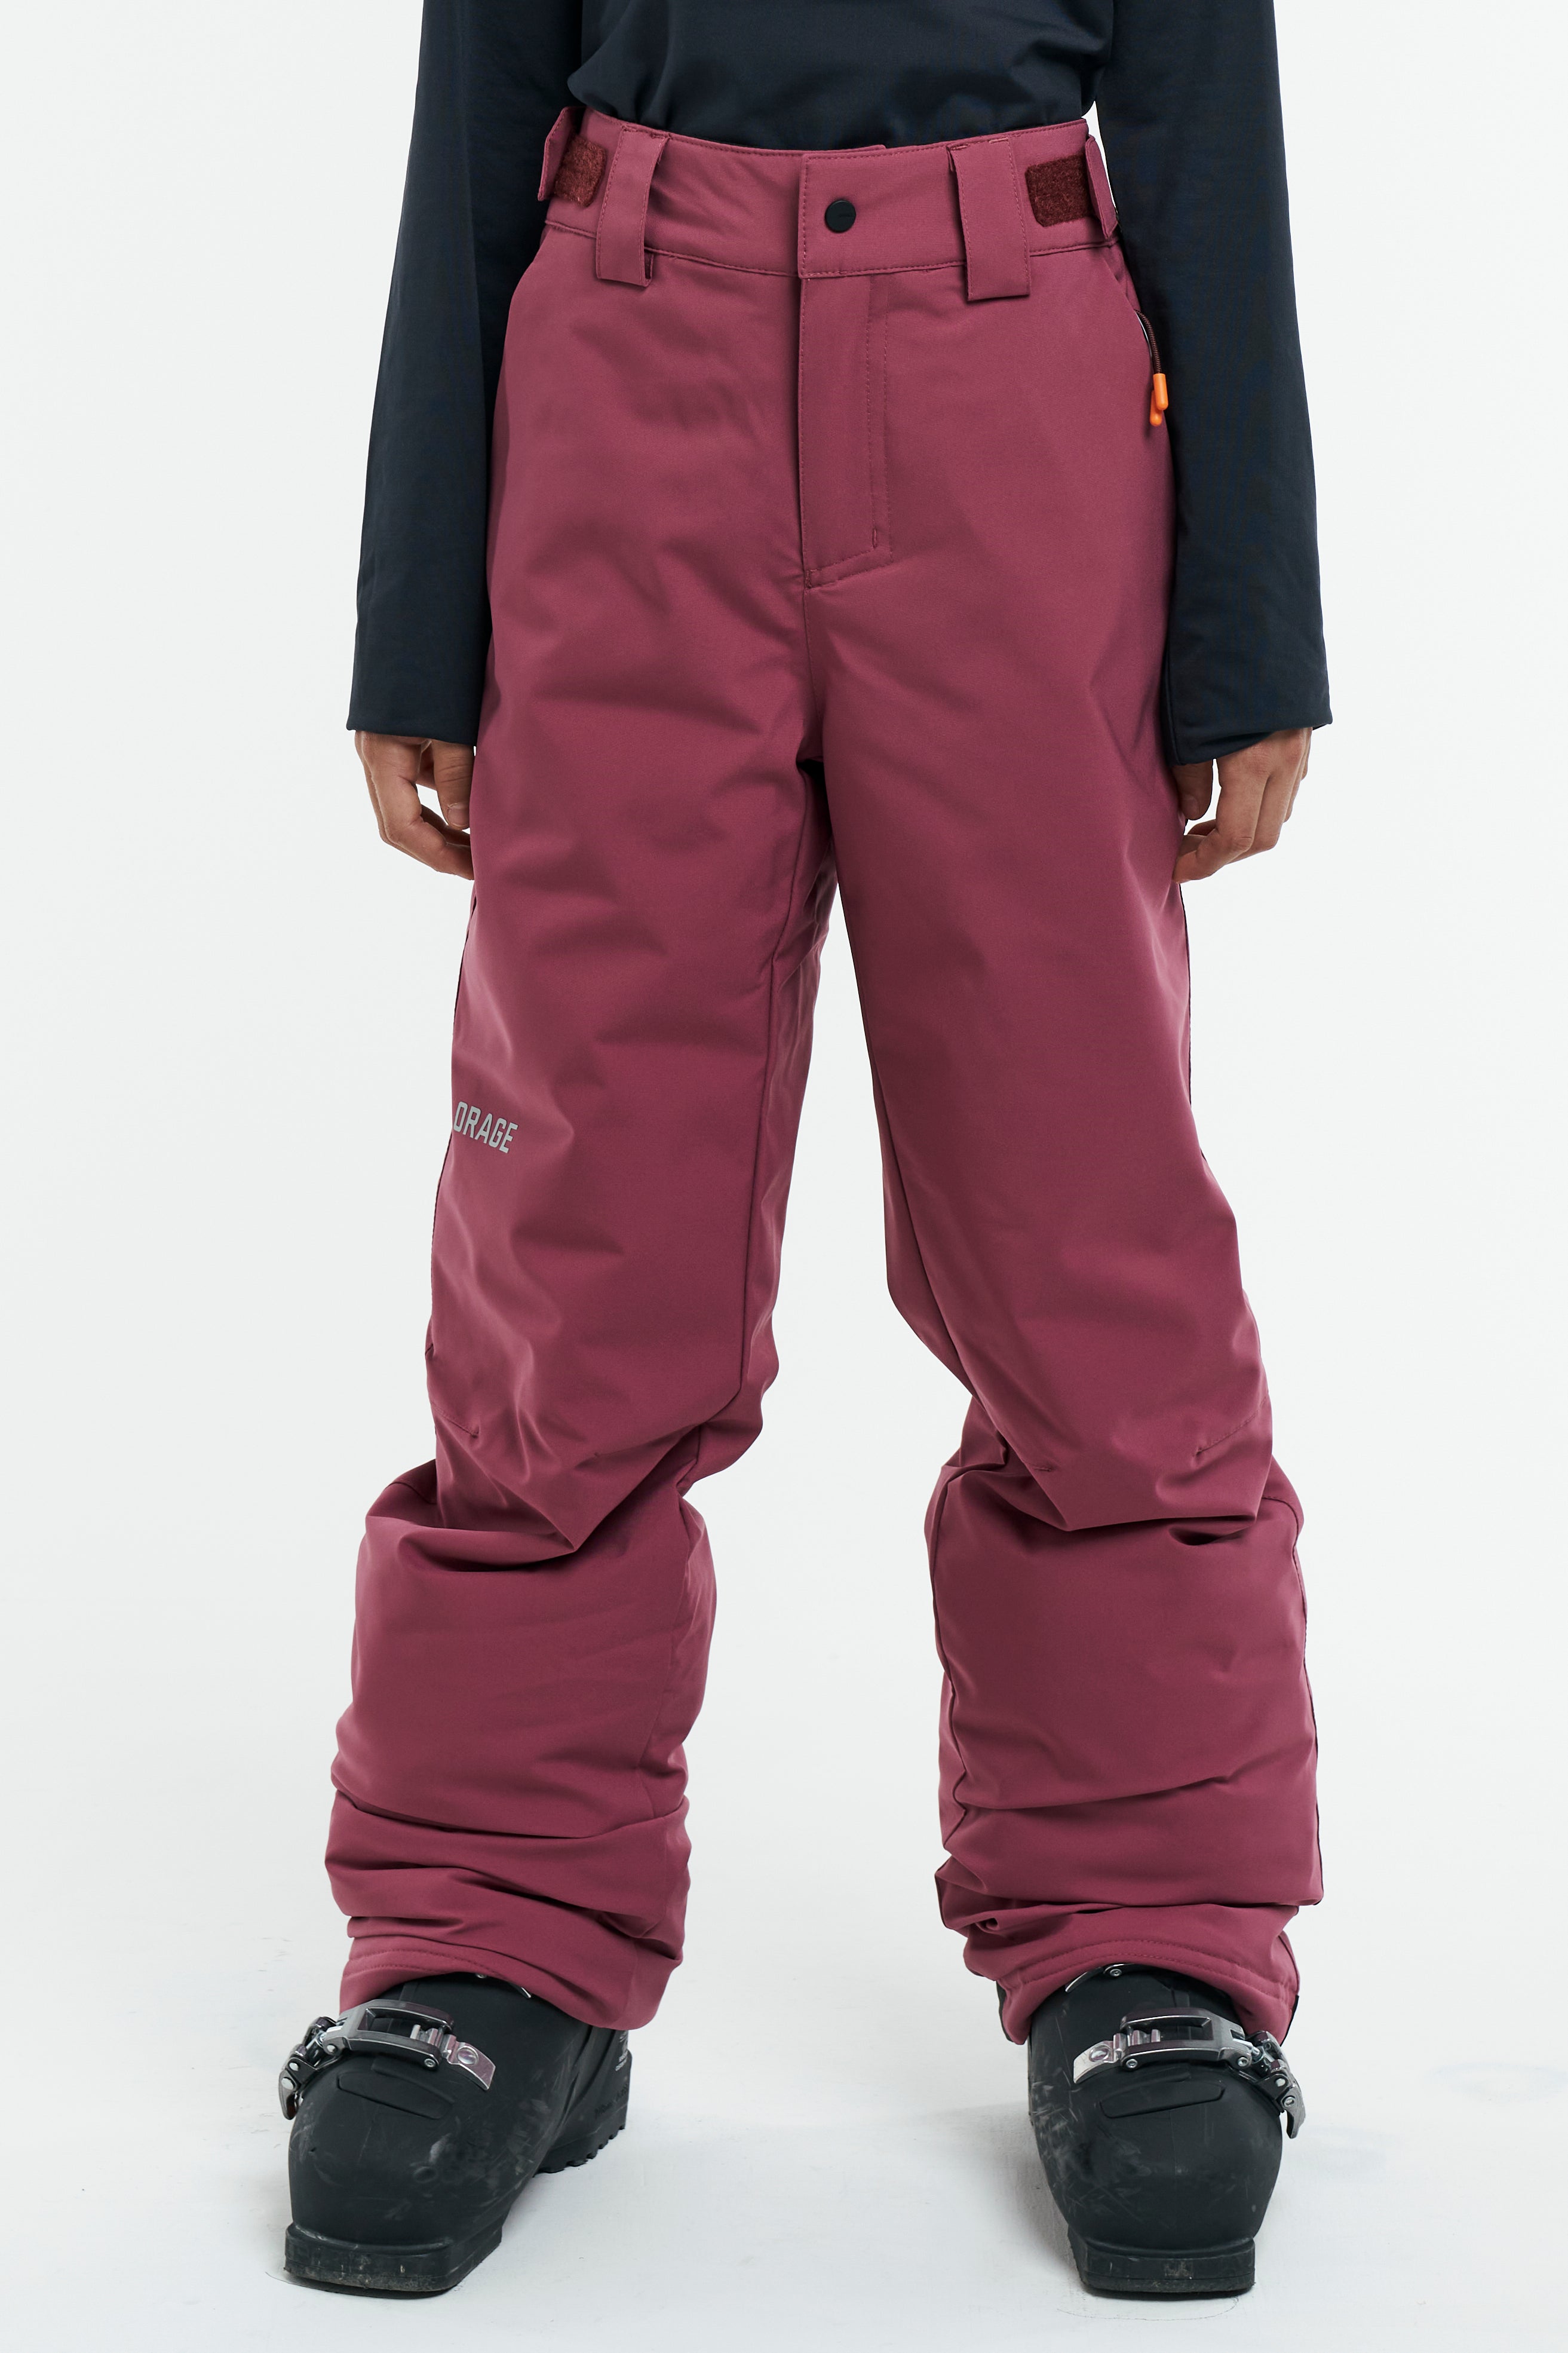 Orage Girls Comi Insulated Pant - Winter 2022/2023